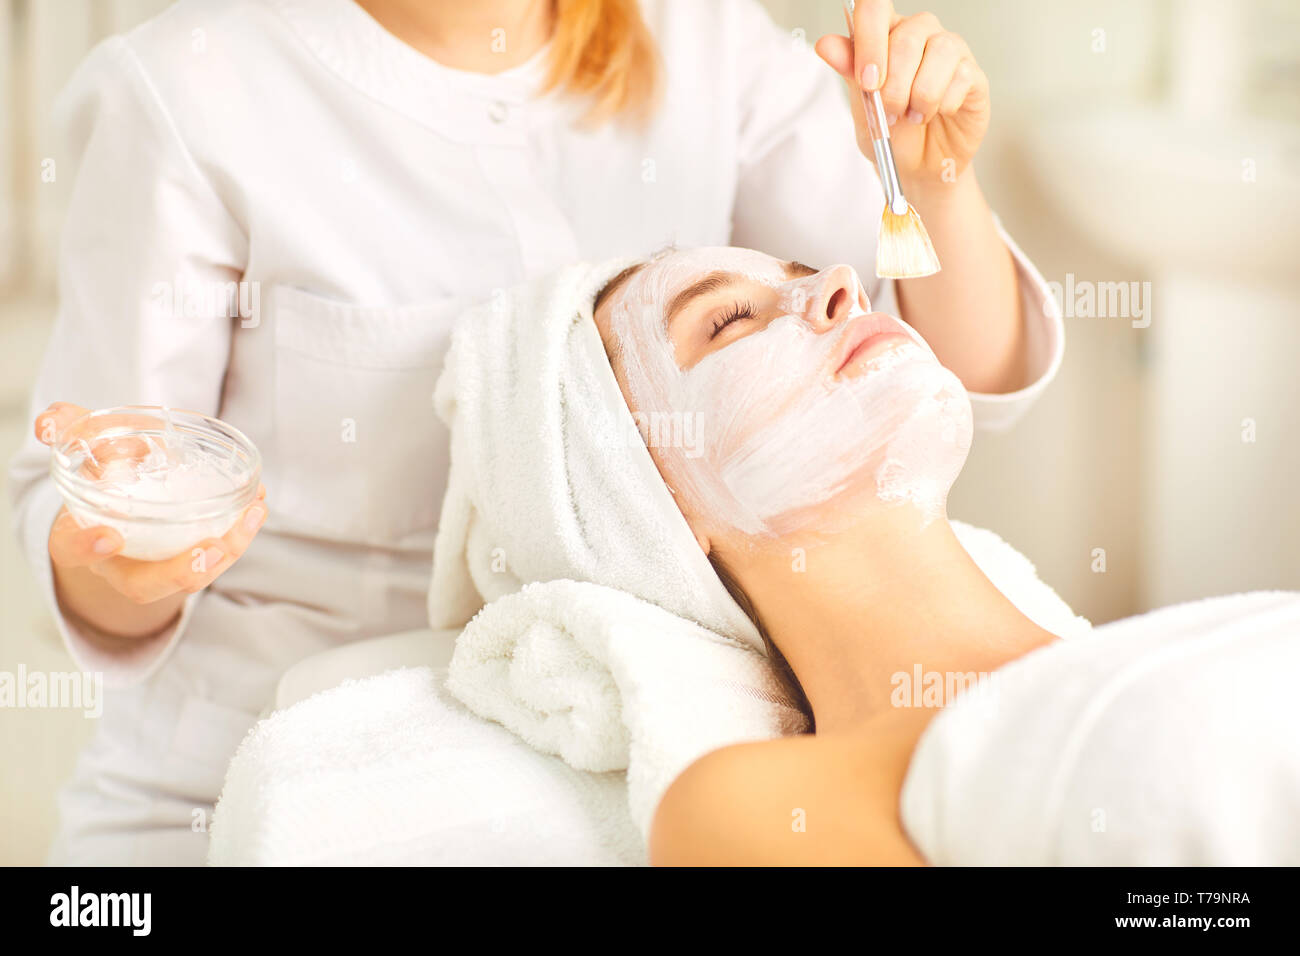 Beautician applies a white mask to a woman in the spa salon. Stock Photo